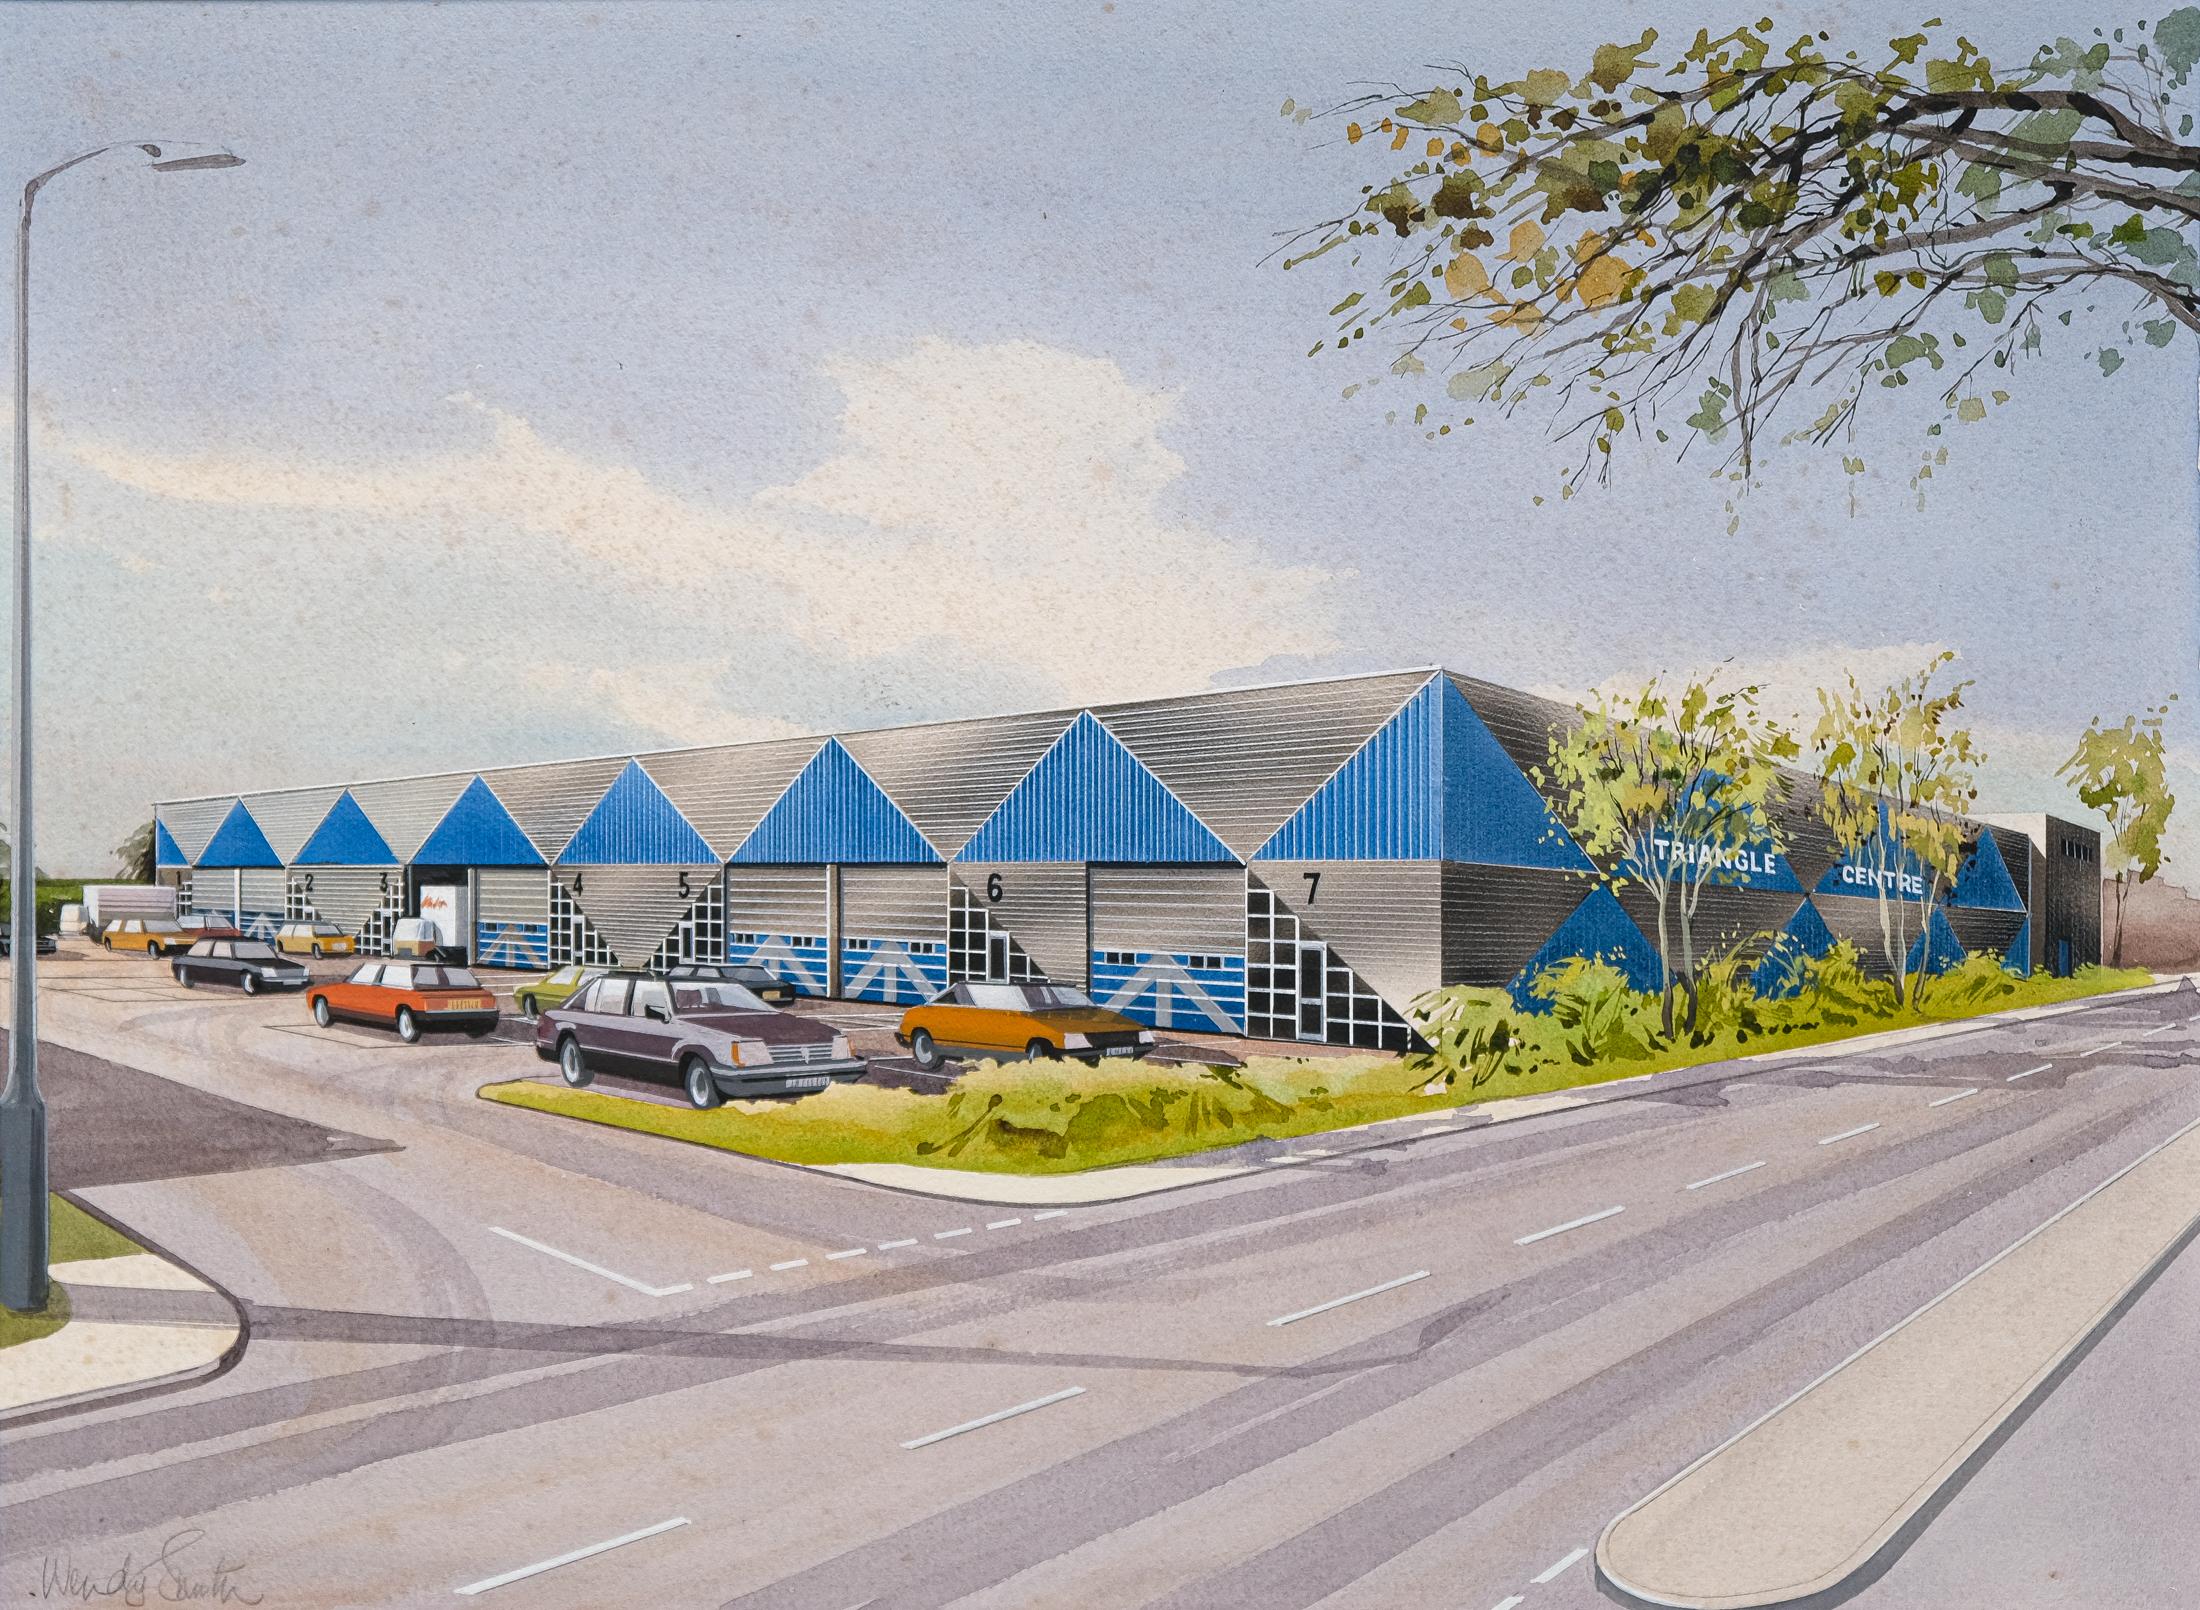 For sale, is a vintage architectural Postmodern design illustration or 'visualisation', on board, of an Industrial Estate in Southall, UK dating from 1988. 

This unique airbrush and watercoloured work is signed in pencil by the artist, 